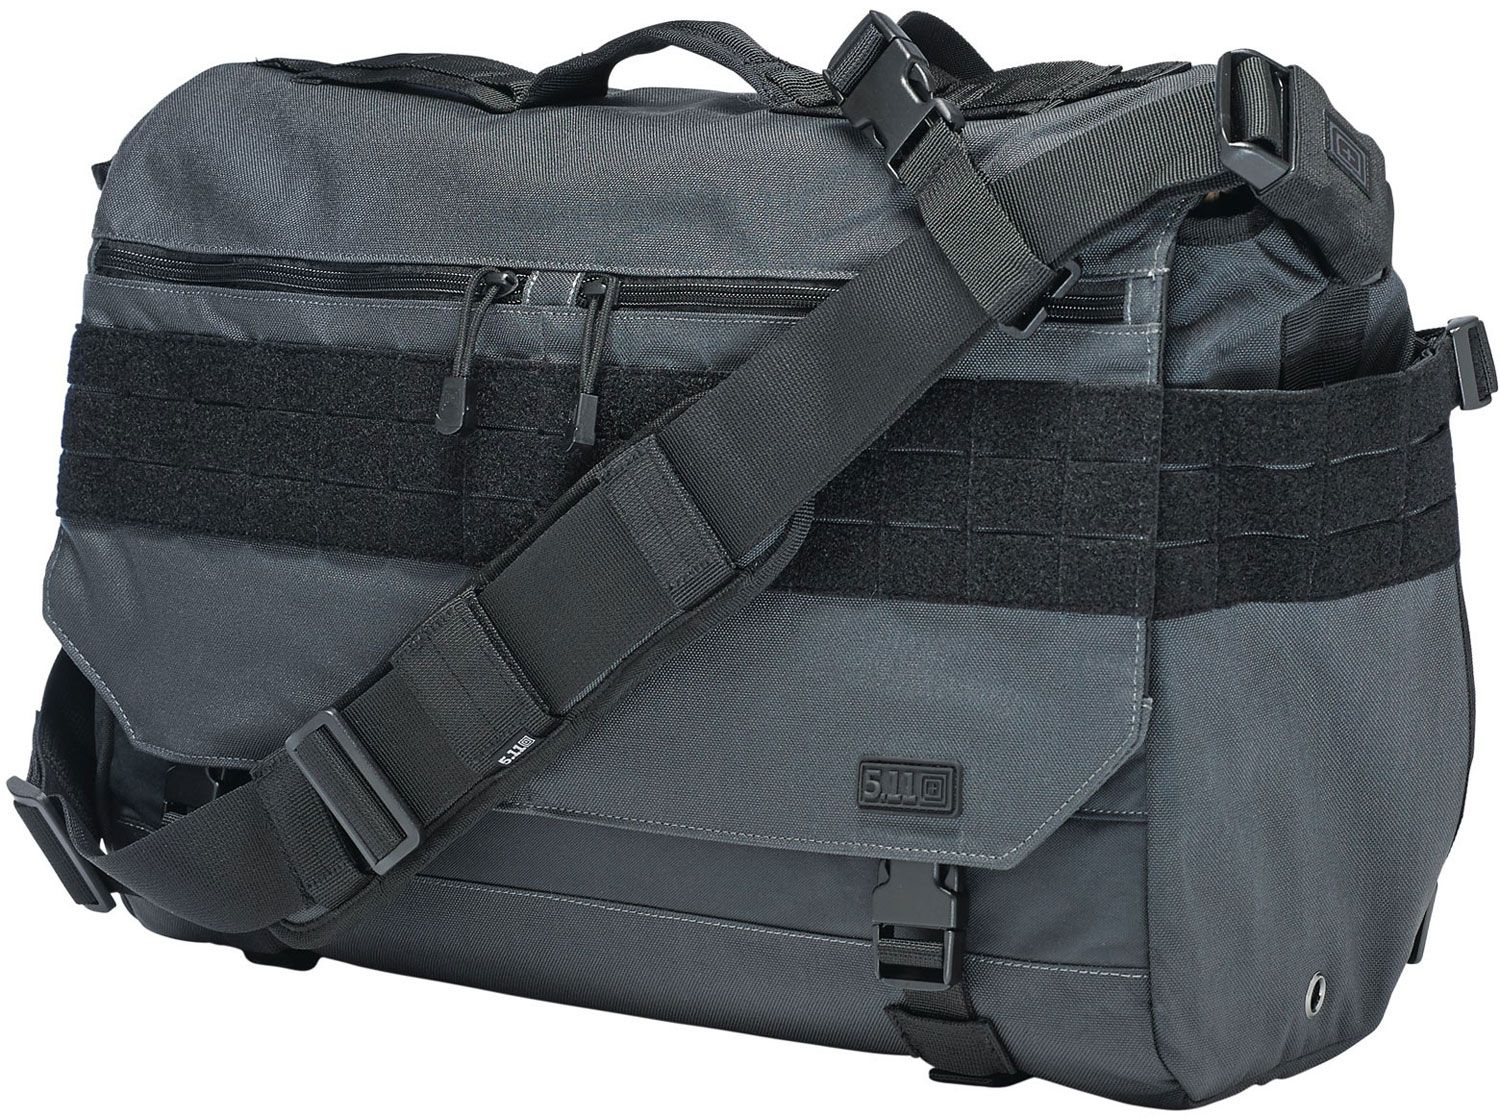 5.11 Tactical Rush Delivery X-Ray Bag, Sandstone (56178-328